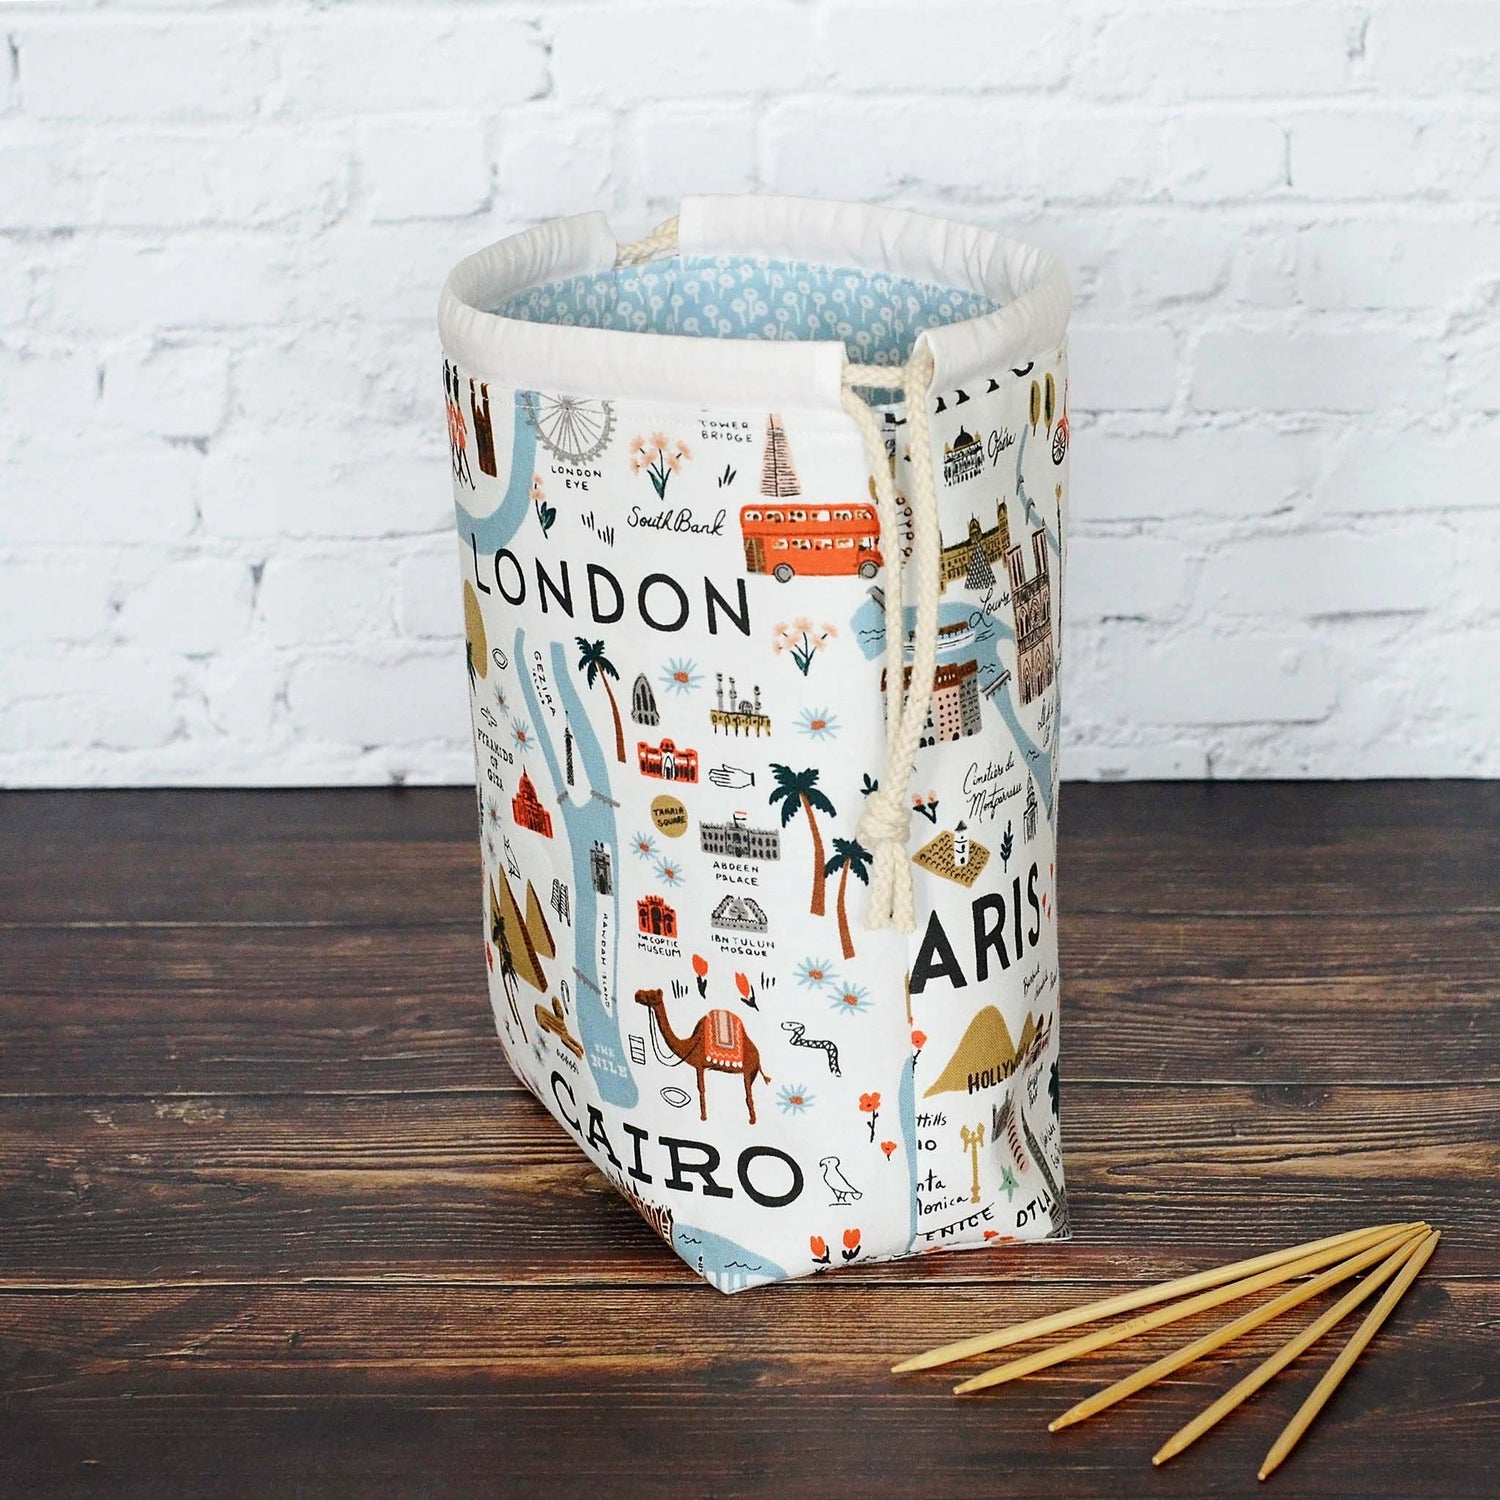 Small drawstring sock knitting bag in pretty travel fabric from the Bon Voyage collection by Rifle Paper Co.  Made in Canada by Yellow Petal Handmade.